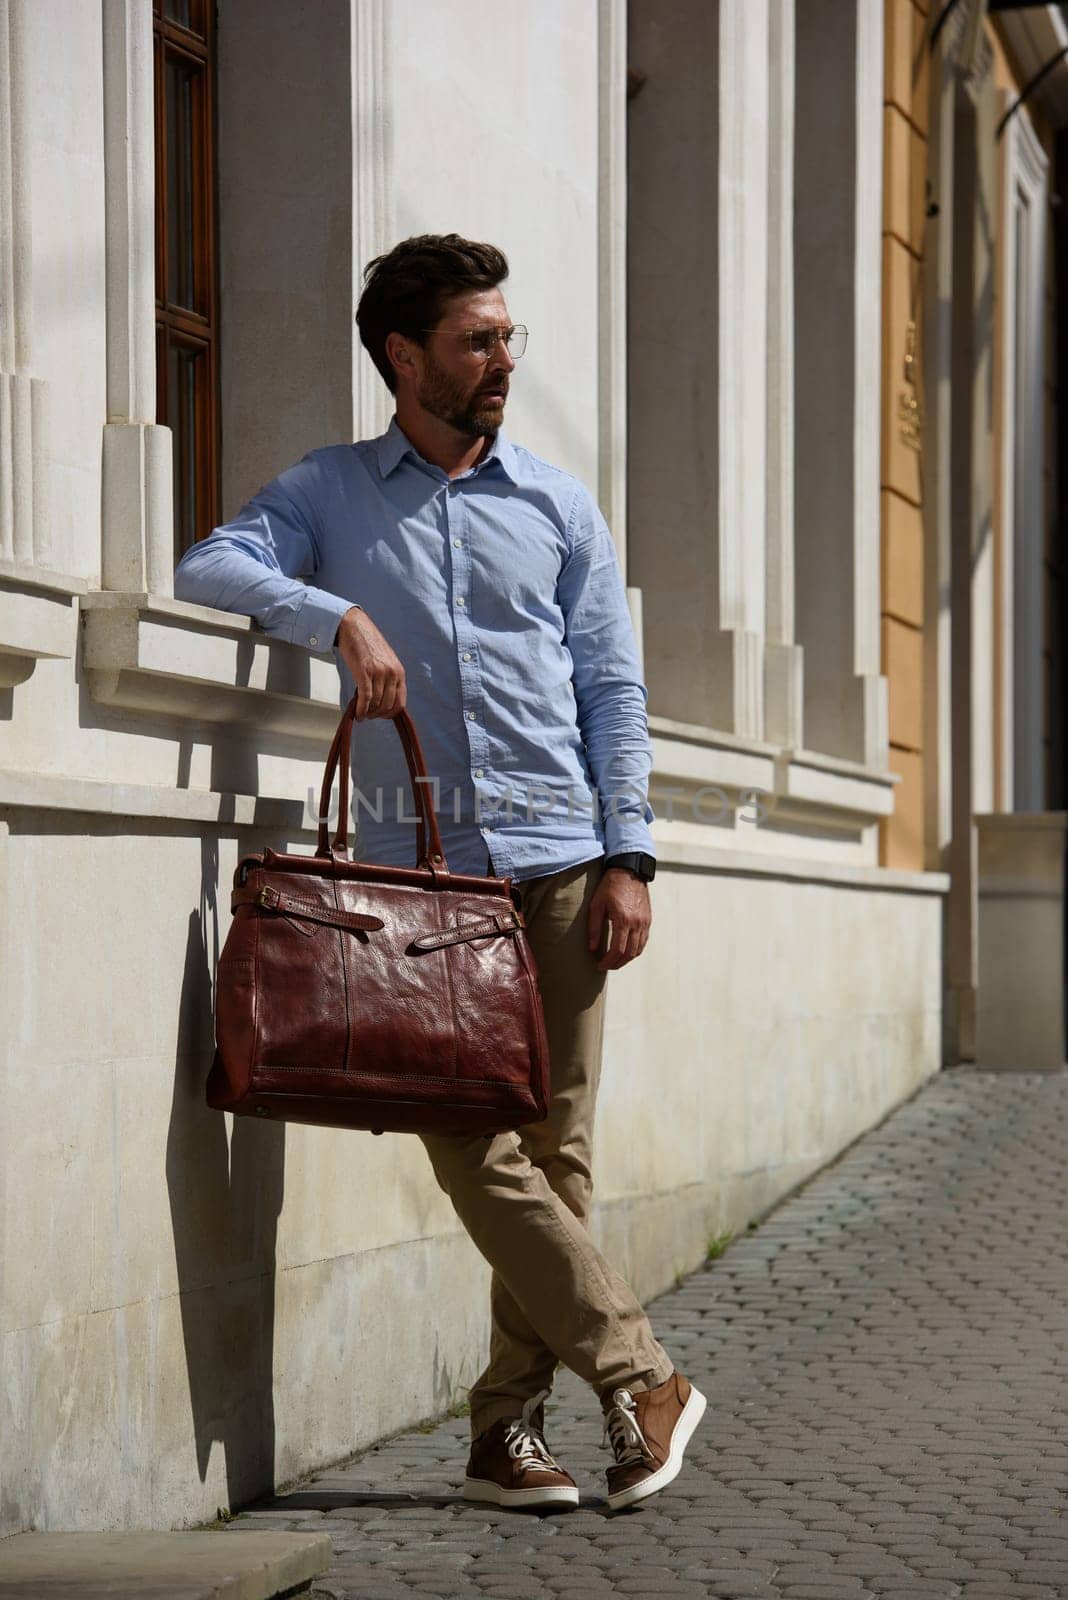 Handsome businessman walking on the street, with luxury leather briefcase. Fashionable style. by Ashtray25